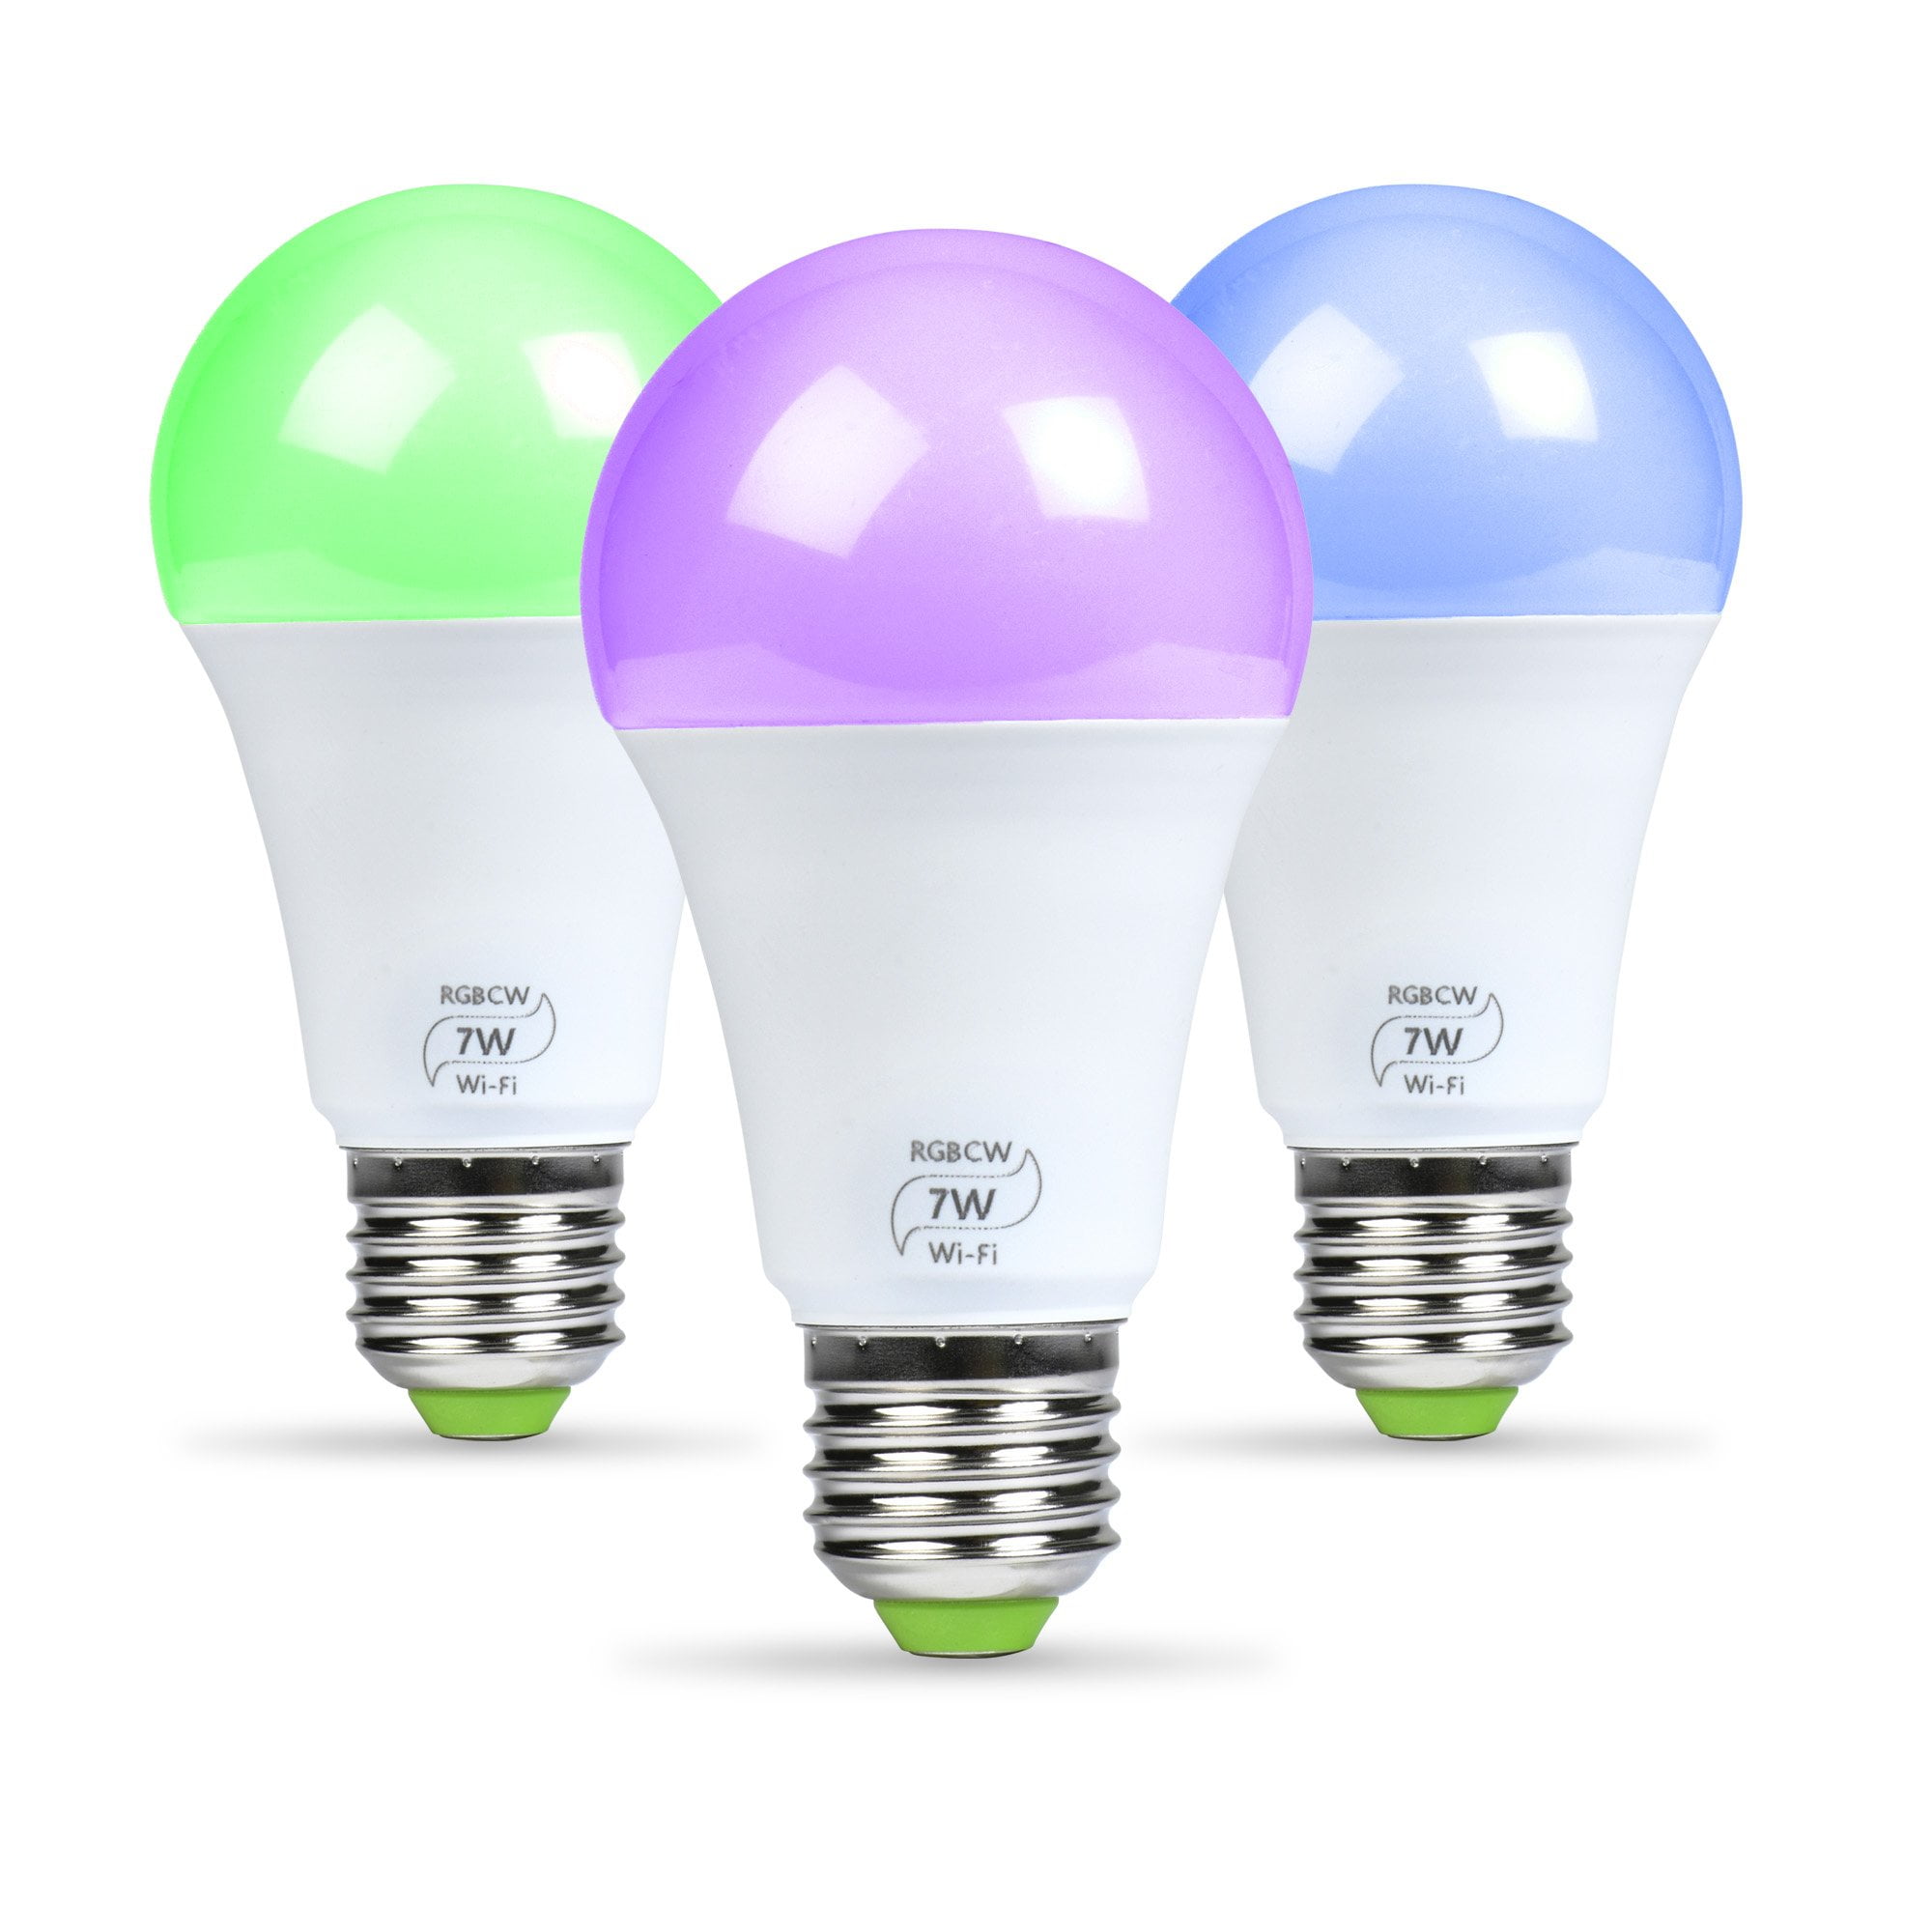 No Hub Required 7W Equivalent 60W RGB Color Changing Bulb Google Home and IFTTT 4 Pack Jiadi Smart LED Light Bulb E27 WiFi Multicolor Light Bulb Work with Alexa 